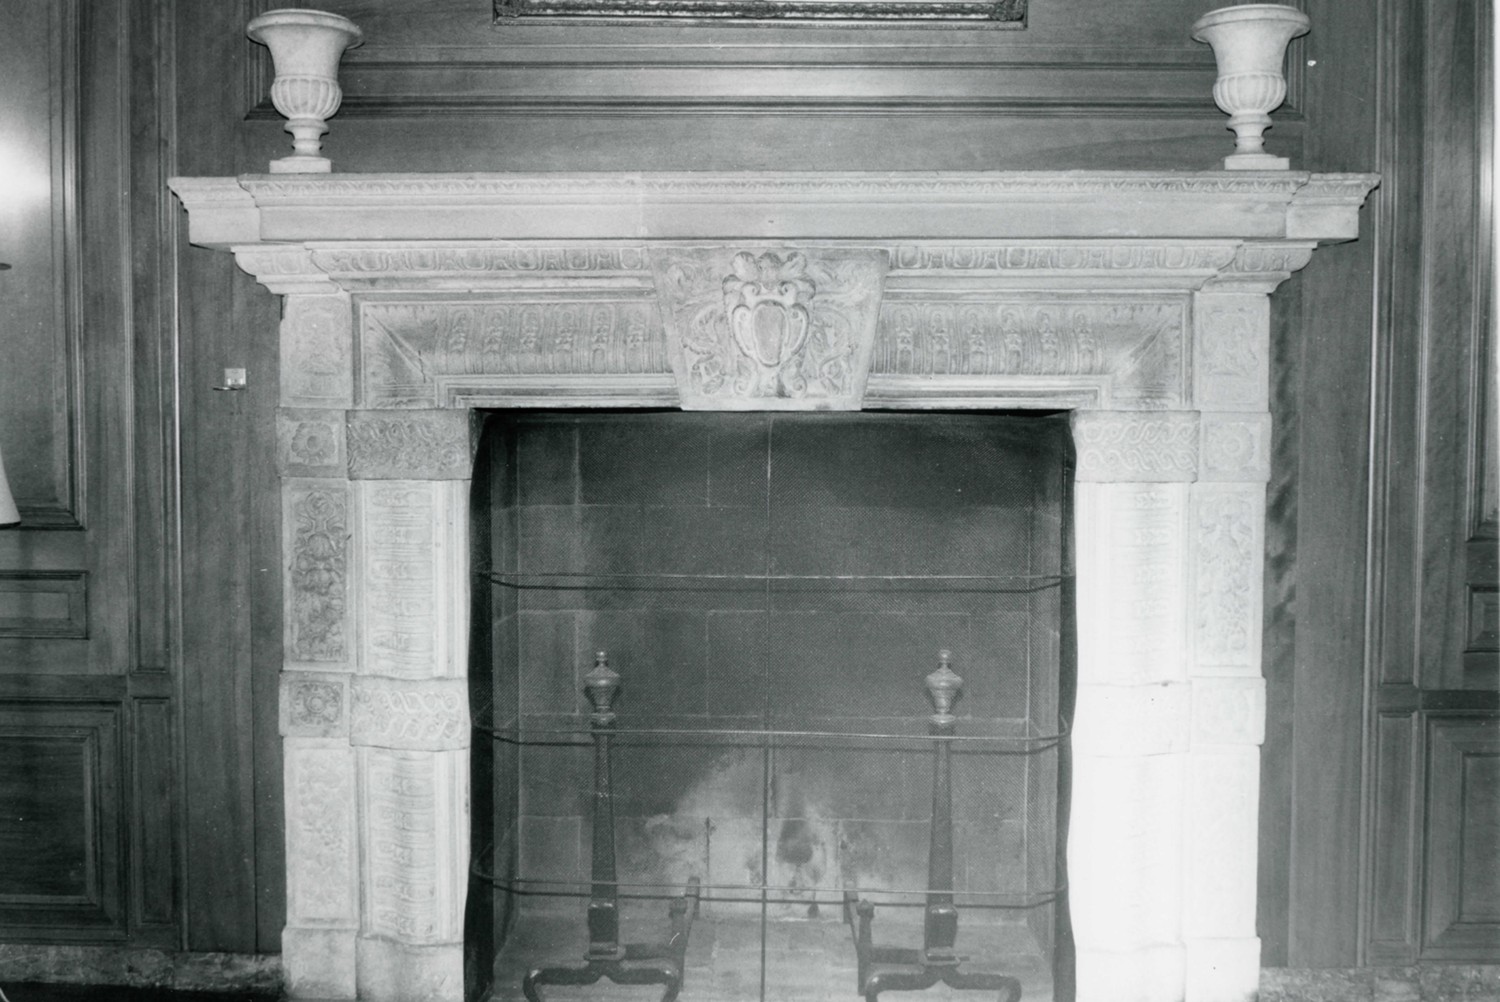 Russell A. Alger Jr. House - War Memorial Association, Grosse Pointe Farms Michigan Dining room fireplace, dated (1625)